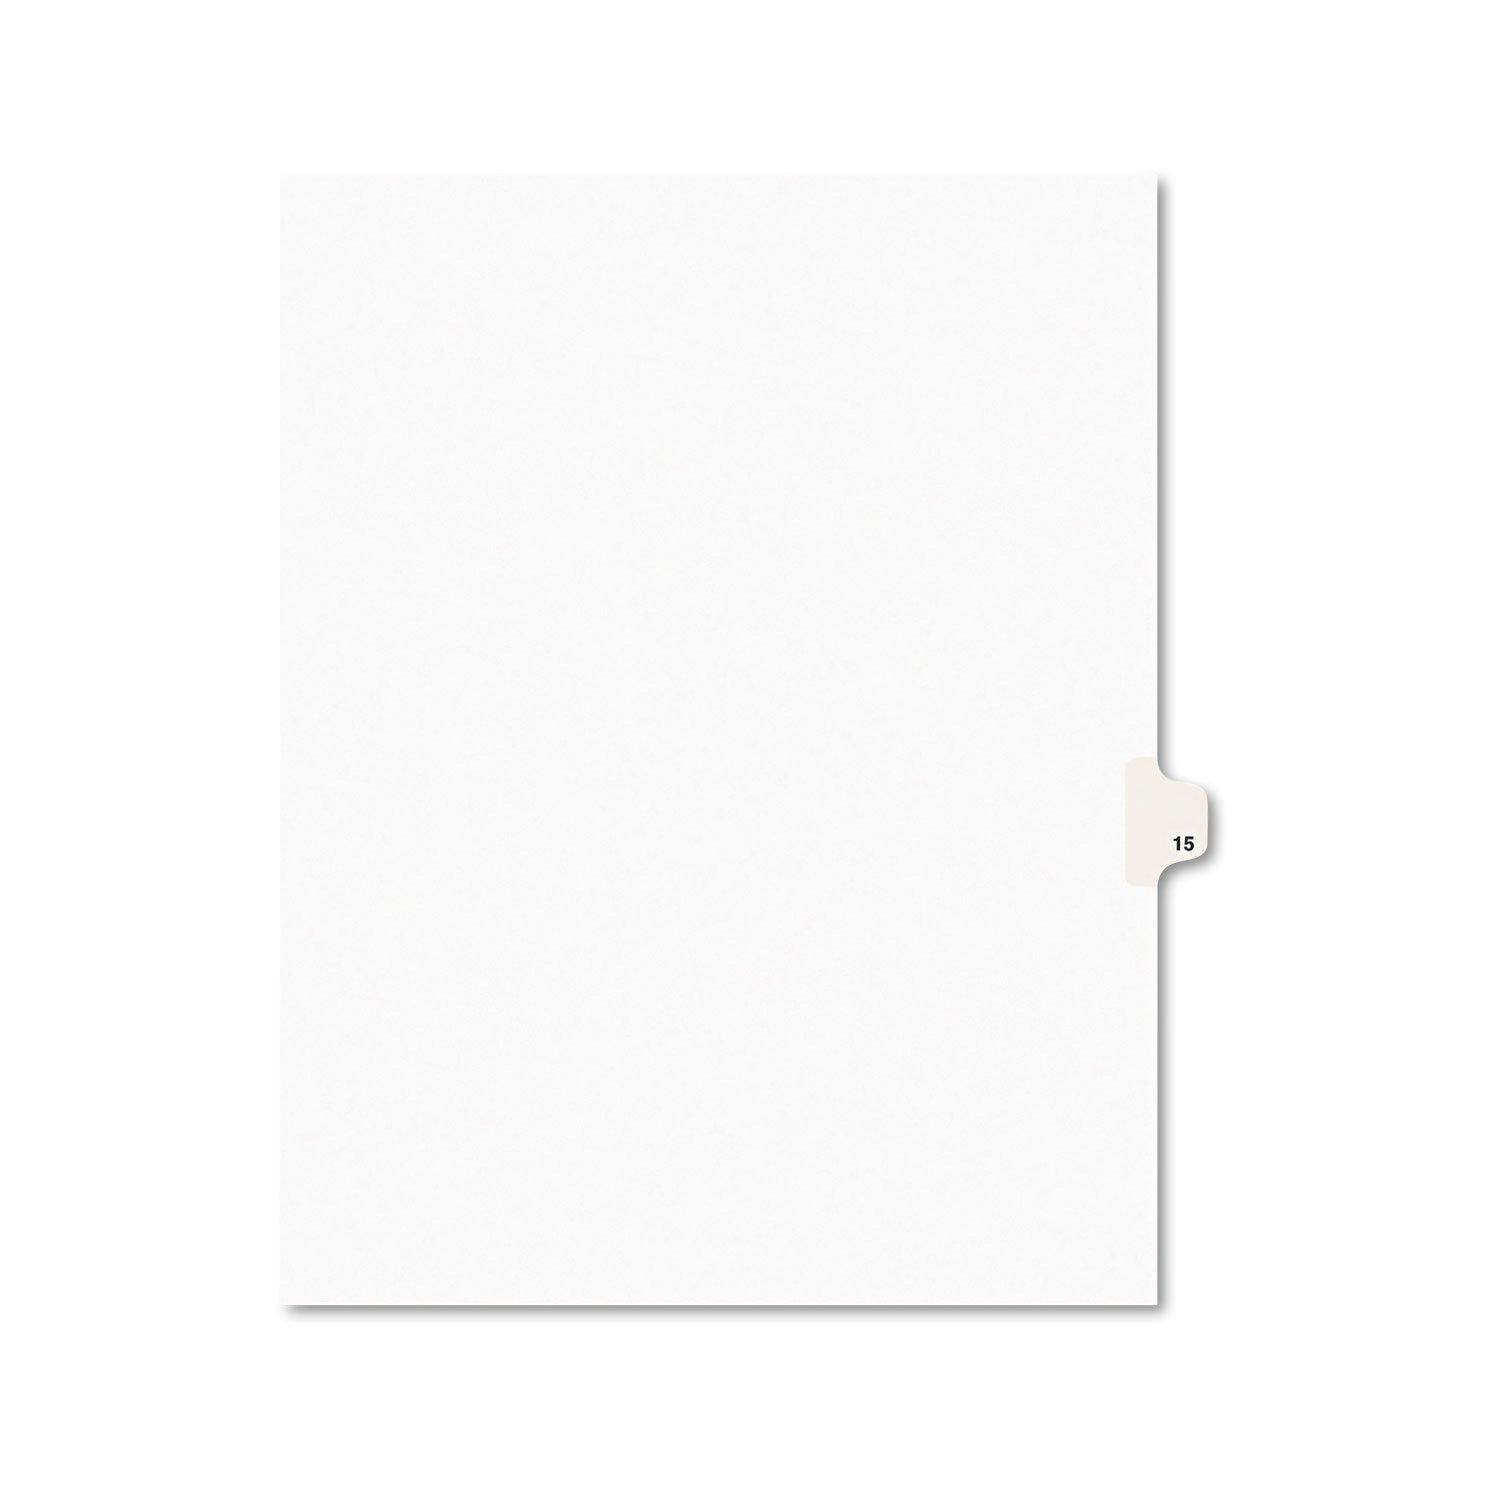  Avery 11925 Preprinted Legal Exhibit Side Tab Index Dividers, Avery Style, 10-Tab, 15, 11 x 8.5, White, 25/Pack (AVE11925) 